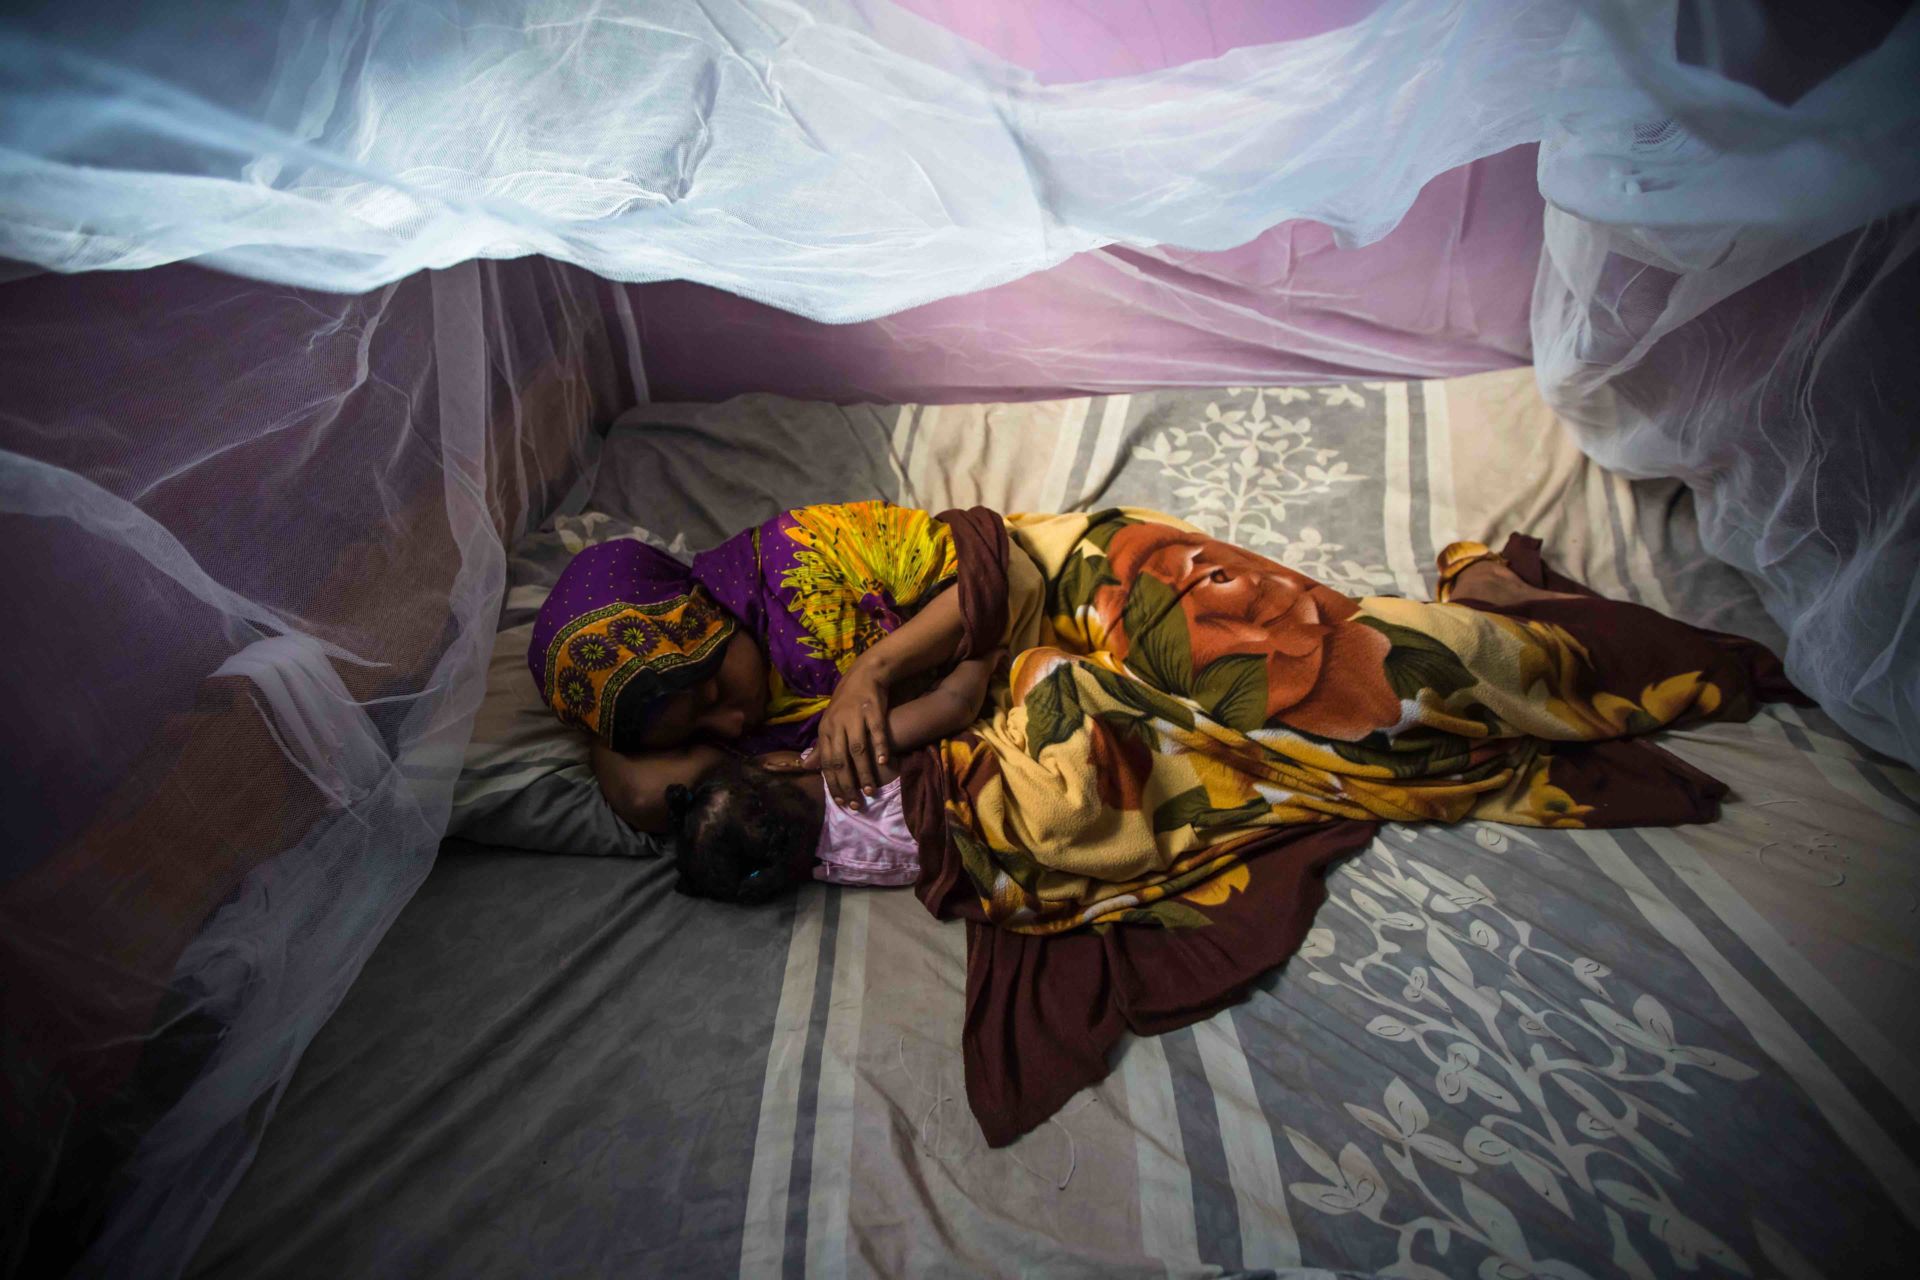 Habiba Suleiman, 29, a district malaria surveillance officer in Zanzibar, naps with her little girl Rahma under a mosquito net. She lives with her husband and their three children in Tanzania, where an estimated 60,000-80,000 people die from malaria each year. Hariba is working to change that and create a malaria-free future for her kids. She visits about six houses in her community a day, testing potential malaria patients, providing treatments when necessary, recording information about the malaria prevention measures they’ve taken, and educating them on how to best protect their families. Her efforts are supported by a USAID-provided motorcycle, mobile phone and tablet to make her efforts more effective. Hariba takes pride in her work: “In life, health is important over everything.”
Morgana Wingard, USAID